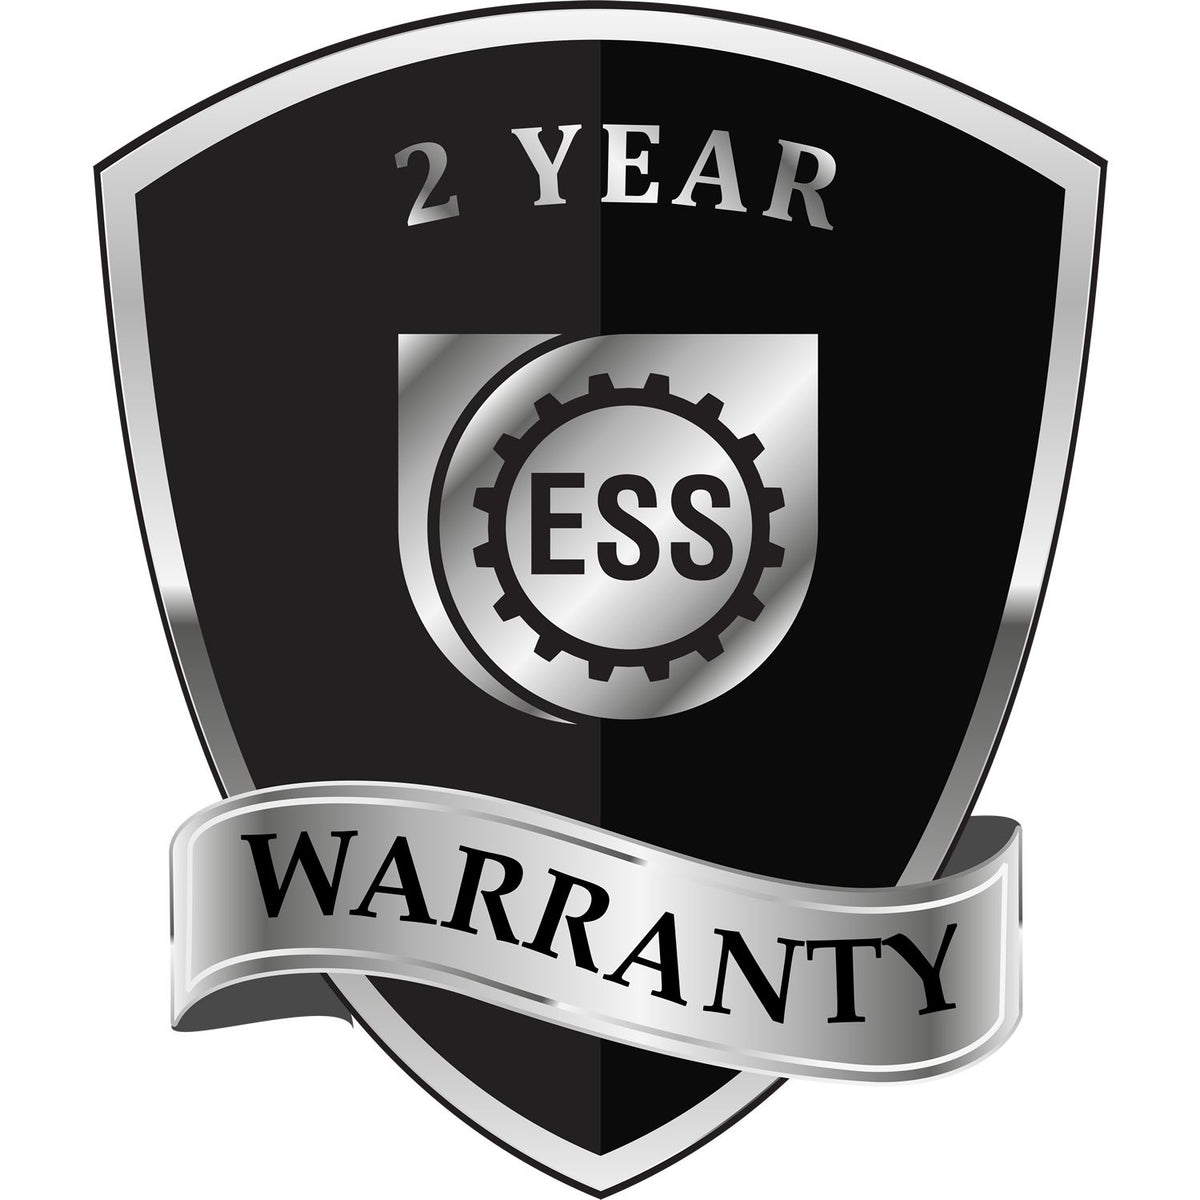 A black and silver badge or emblem showing warranty information for the Soft West Virginia Professional Geologist Seal